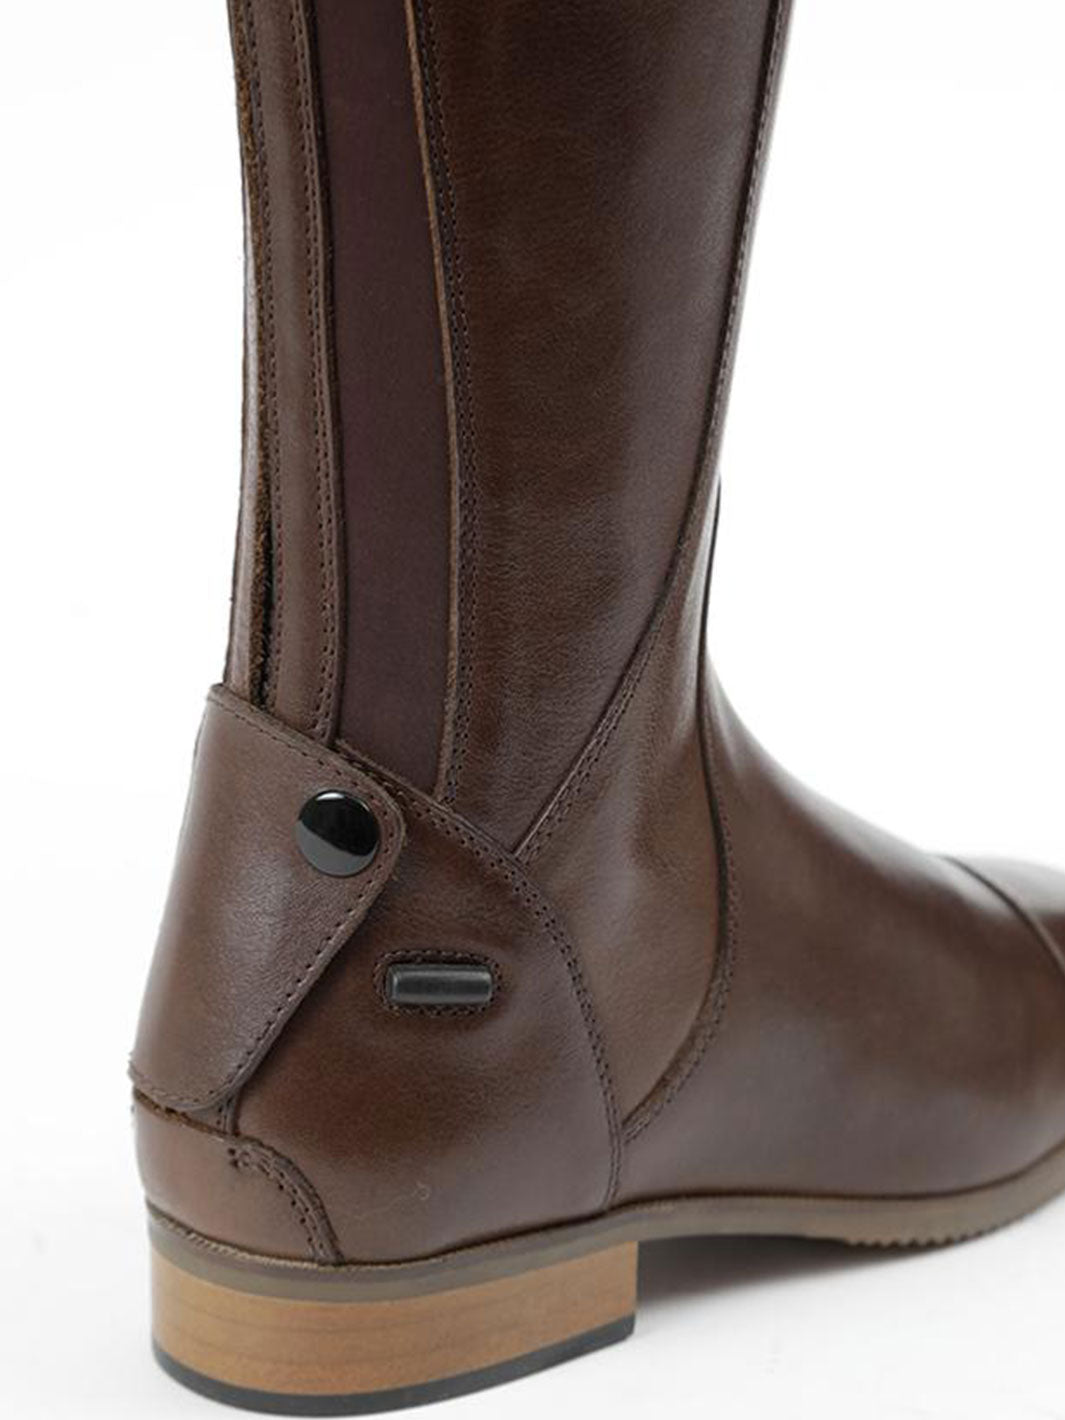 PE Mazziano Ladies Long Leather Dress Riding Boots Brown